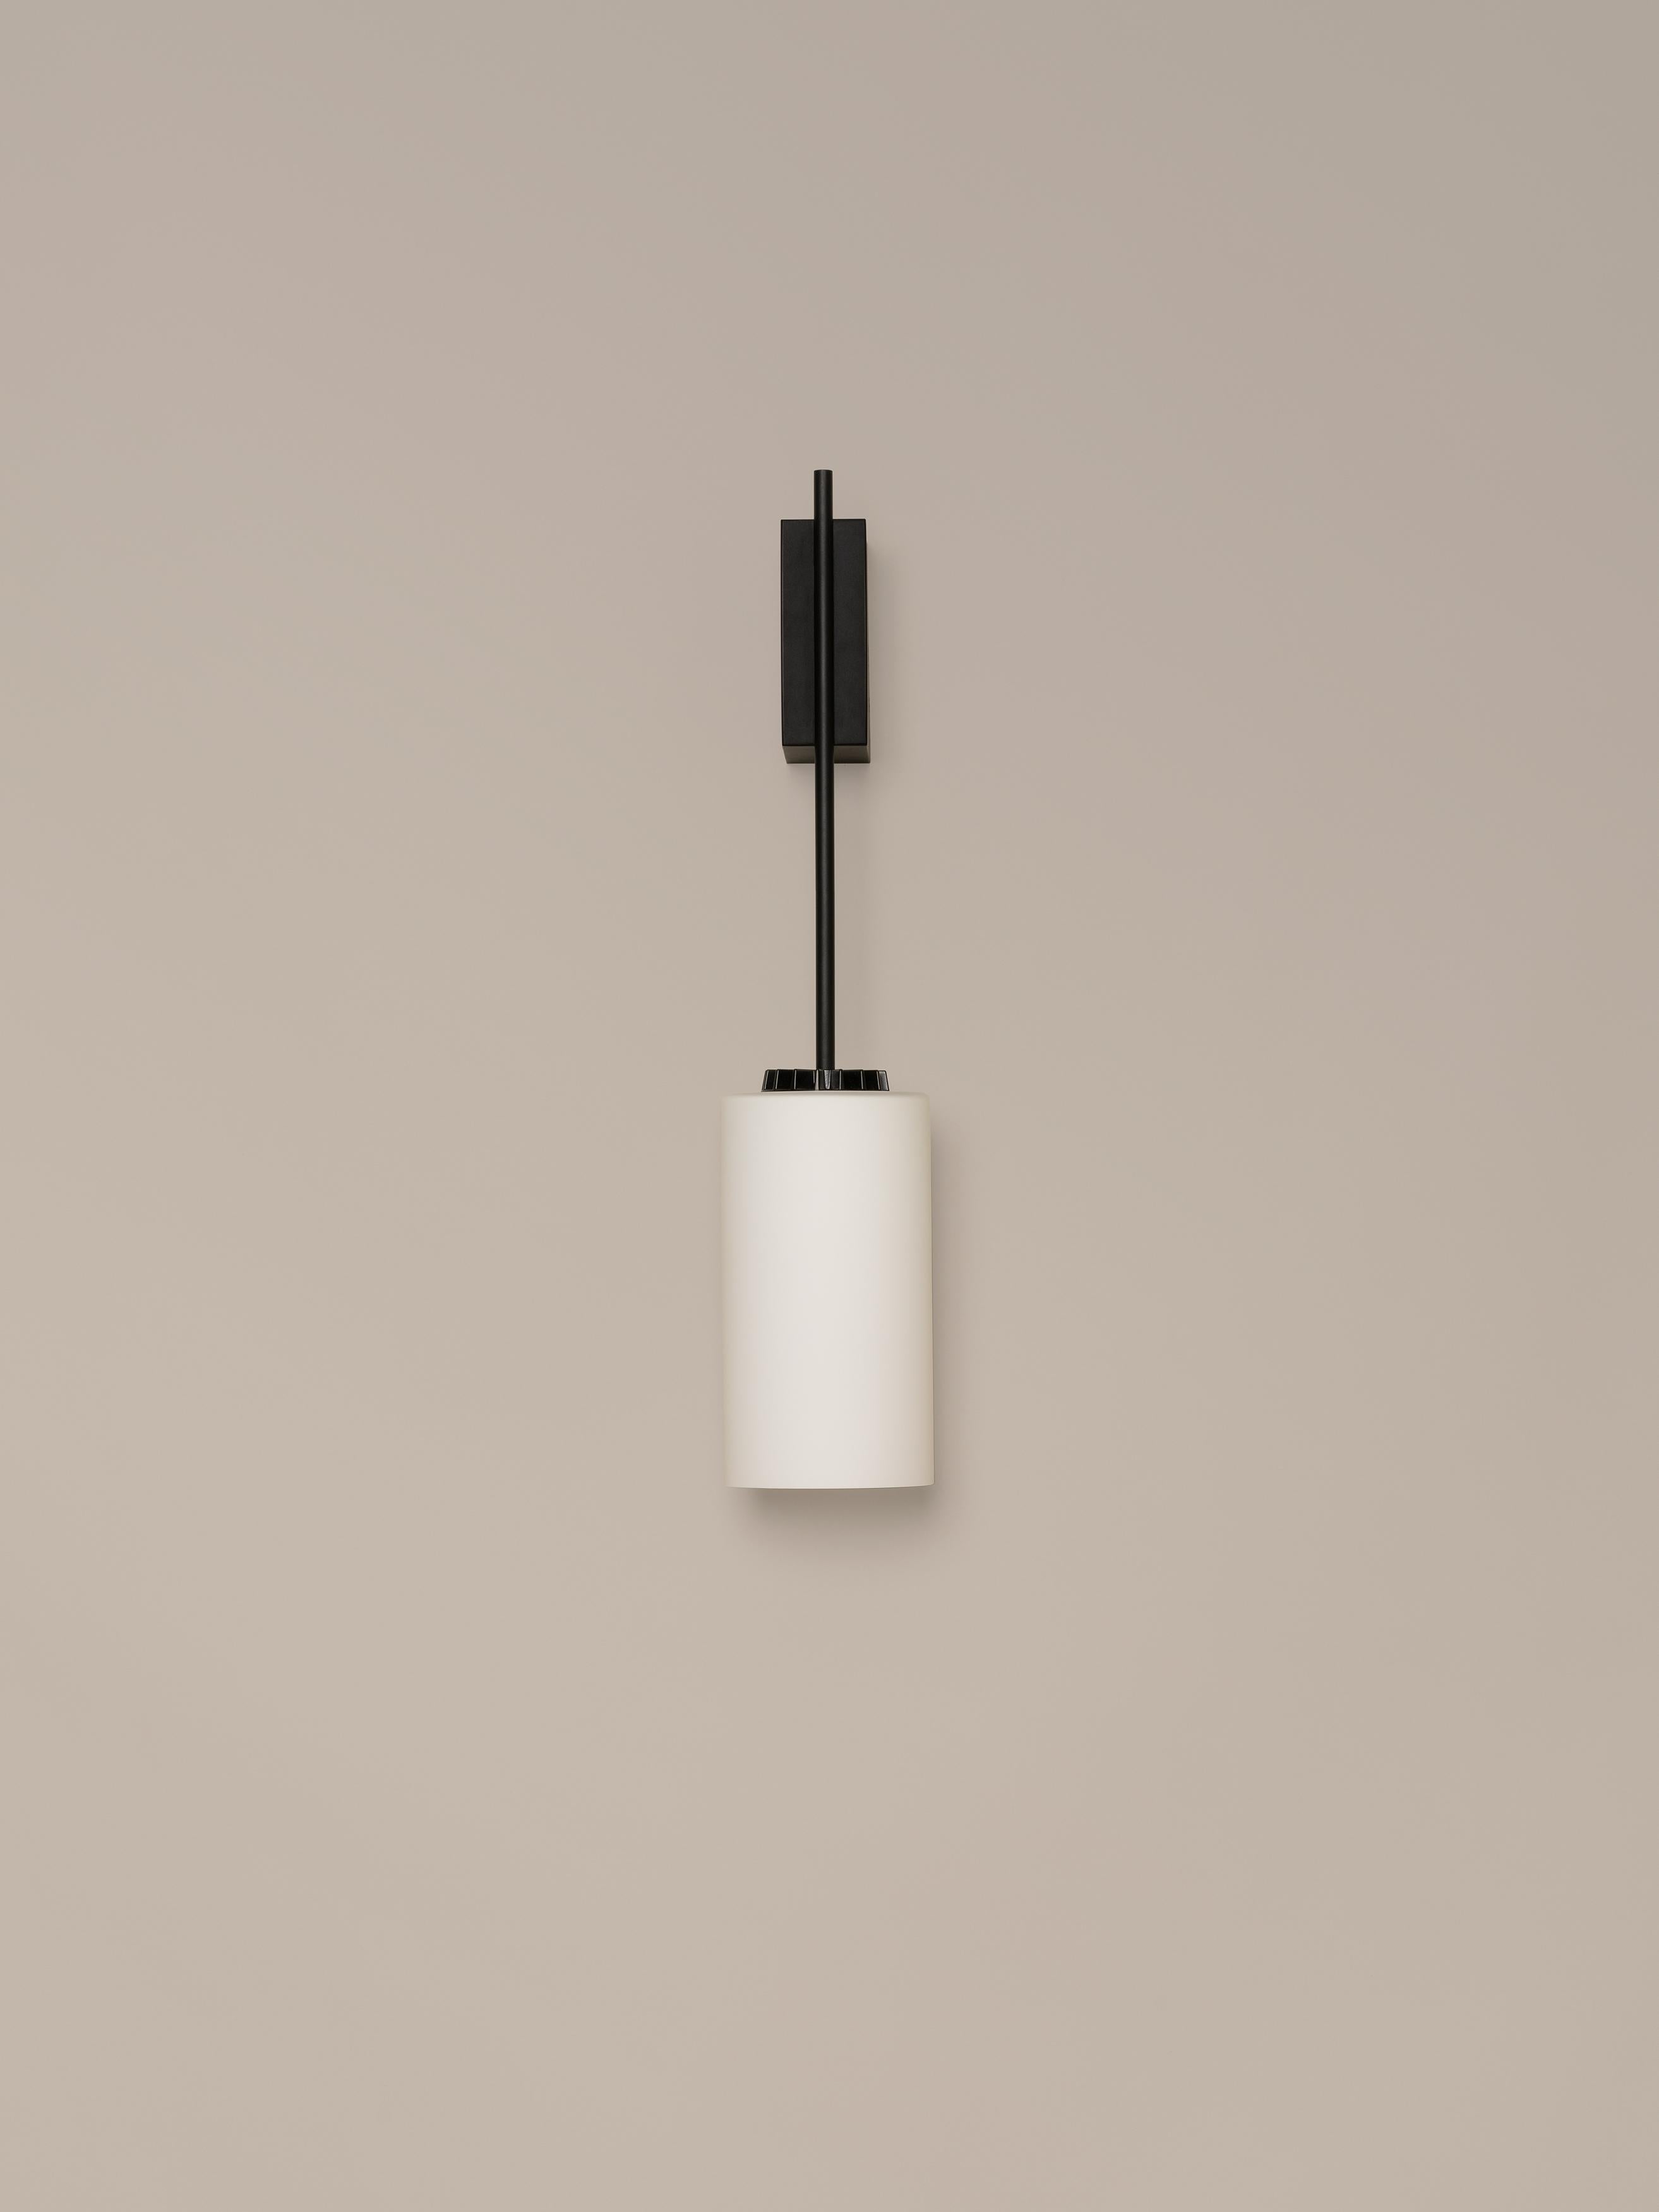 Glass cirio wall lamp by Antoni Arola
Dimensions: D 11 x W 14 x H 54 cm
Materials: metal, white opal glass.

The wall version of cirio allows the light to be placed at a closer scale to the user. This creates a succession of rhythms that, in